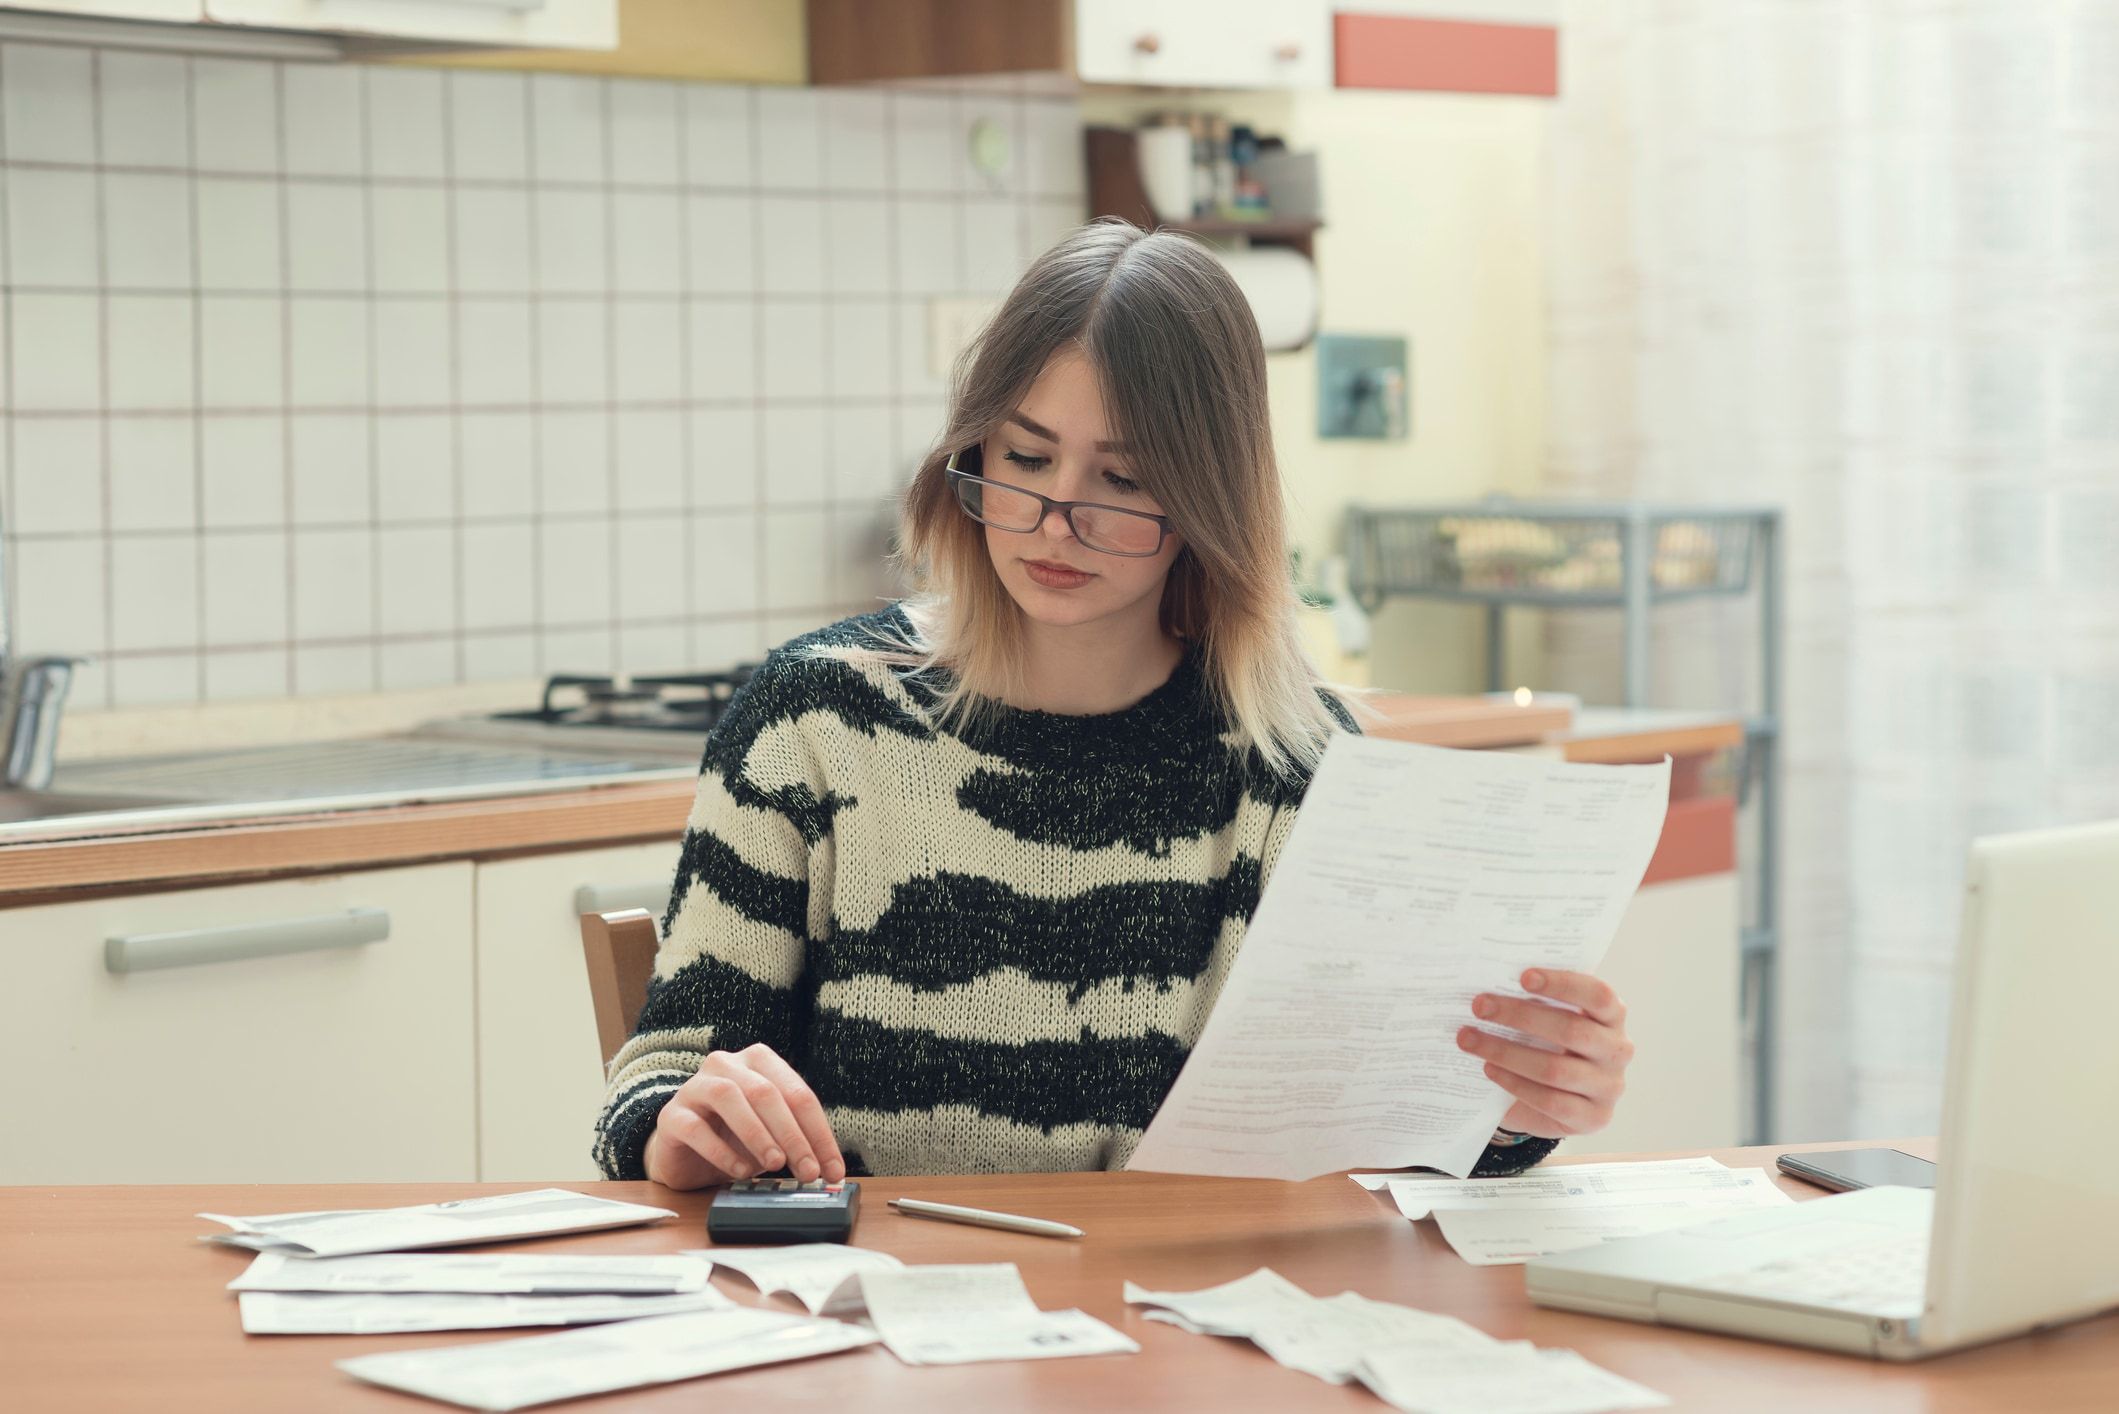 How household employees can file taxes without a W-2